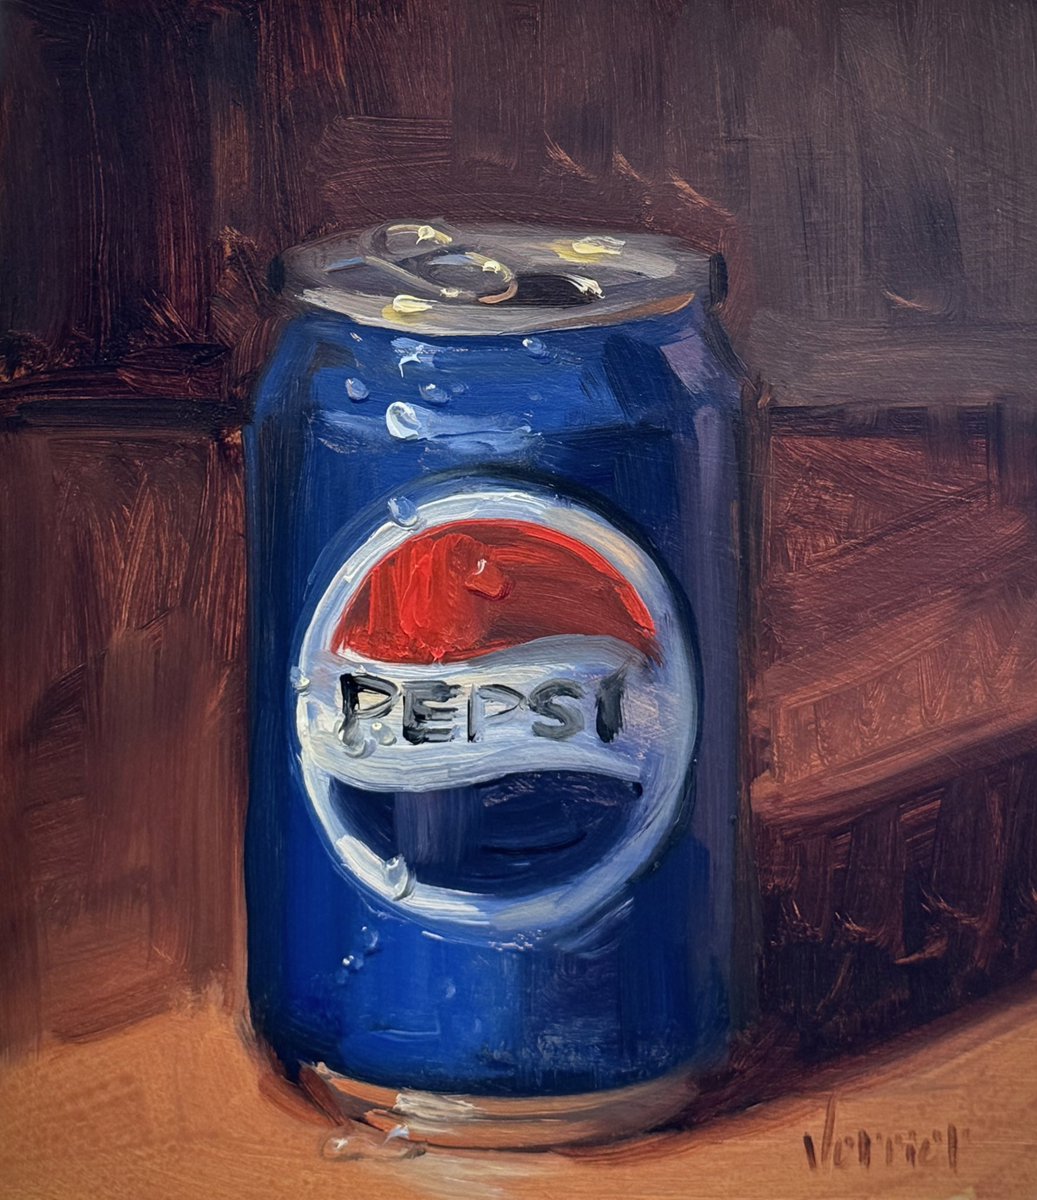 My oil painting of Pepsi